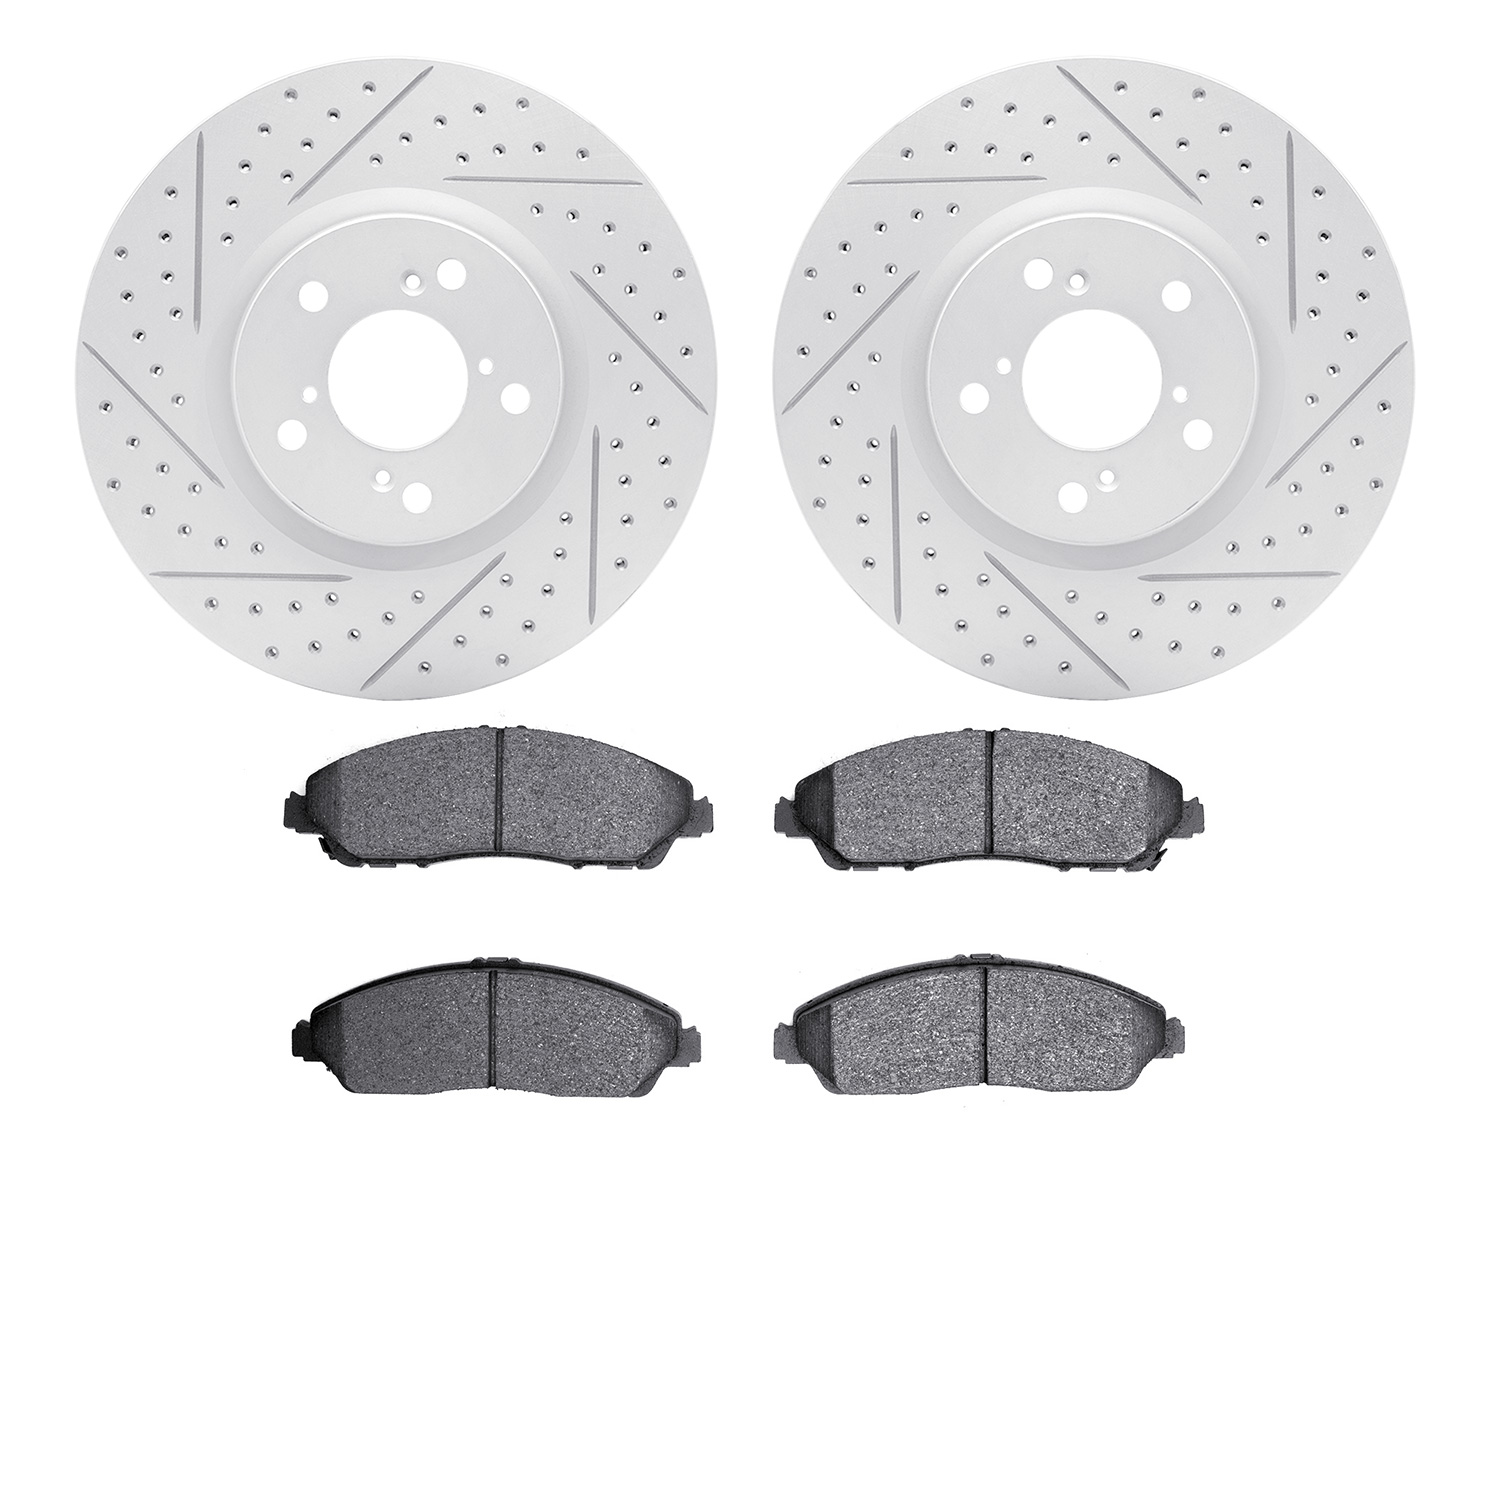 2502-59071 Geoperformance Drilled/Slotted Rotors w/5000 Advanced Brake Pads Kit, 2014-2020 Acura/Honda, Position: Front